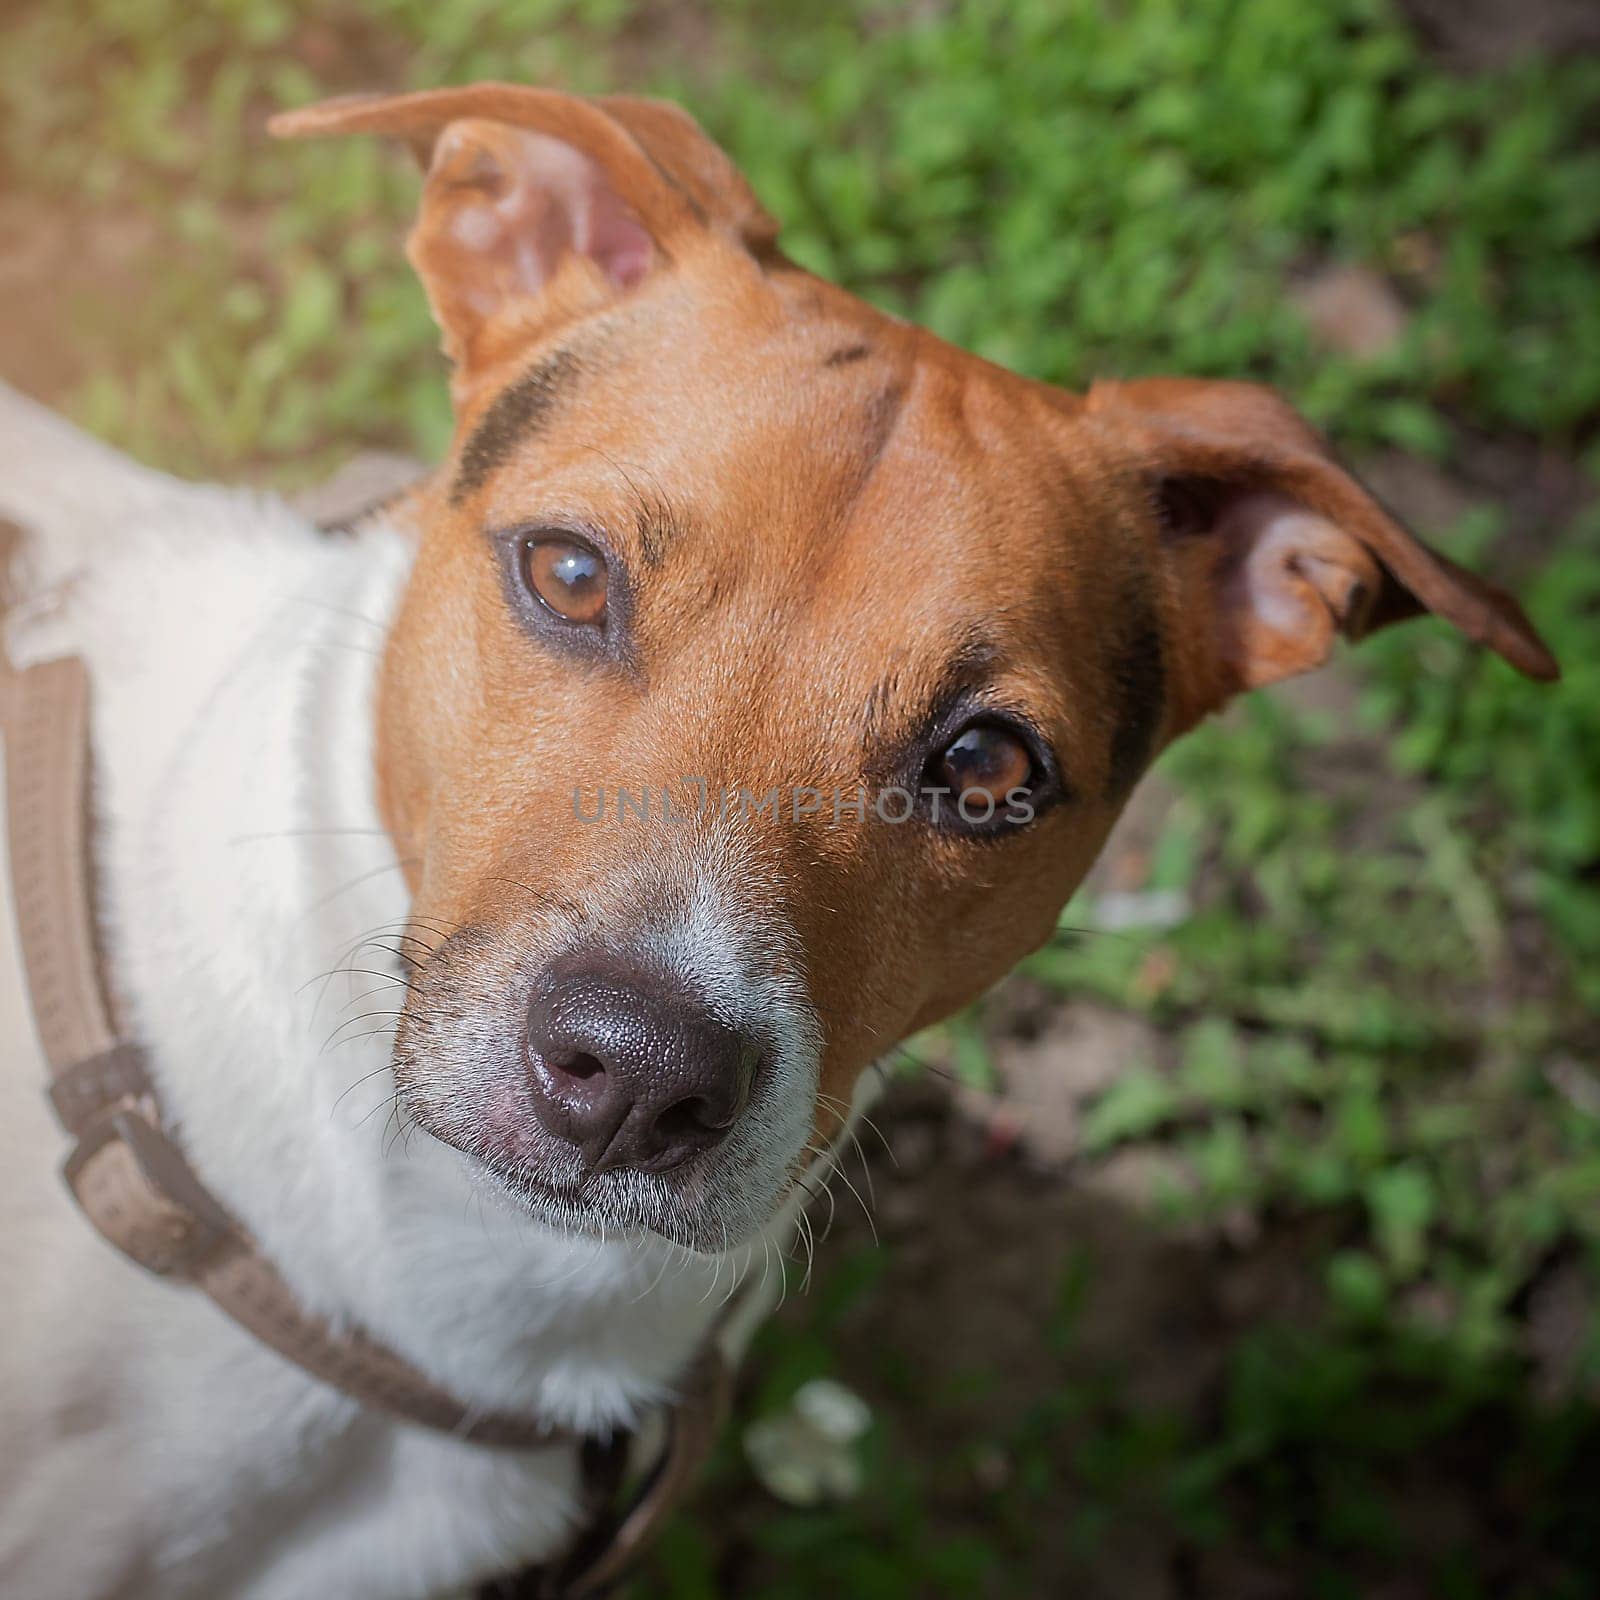 A curious look from a dog. Pet. Four-legged friend. Close up portrait of dog Jen Russell Terrier. Photo aspect ratio 1:1